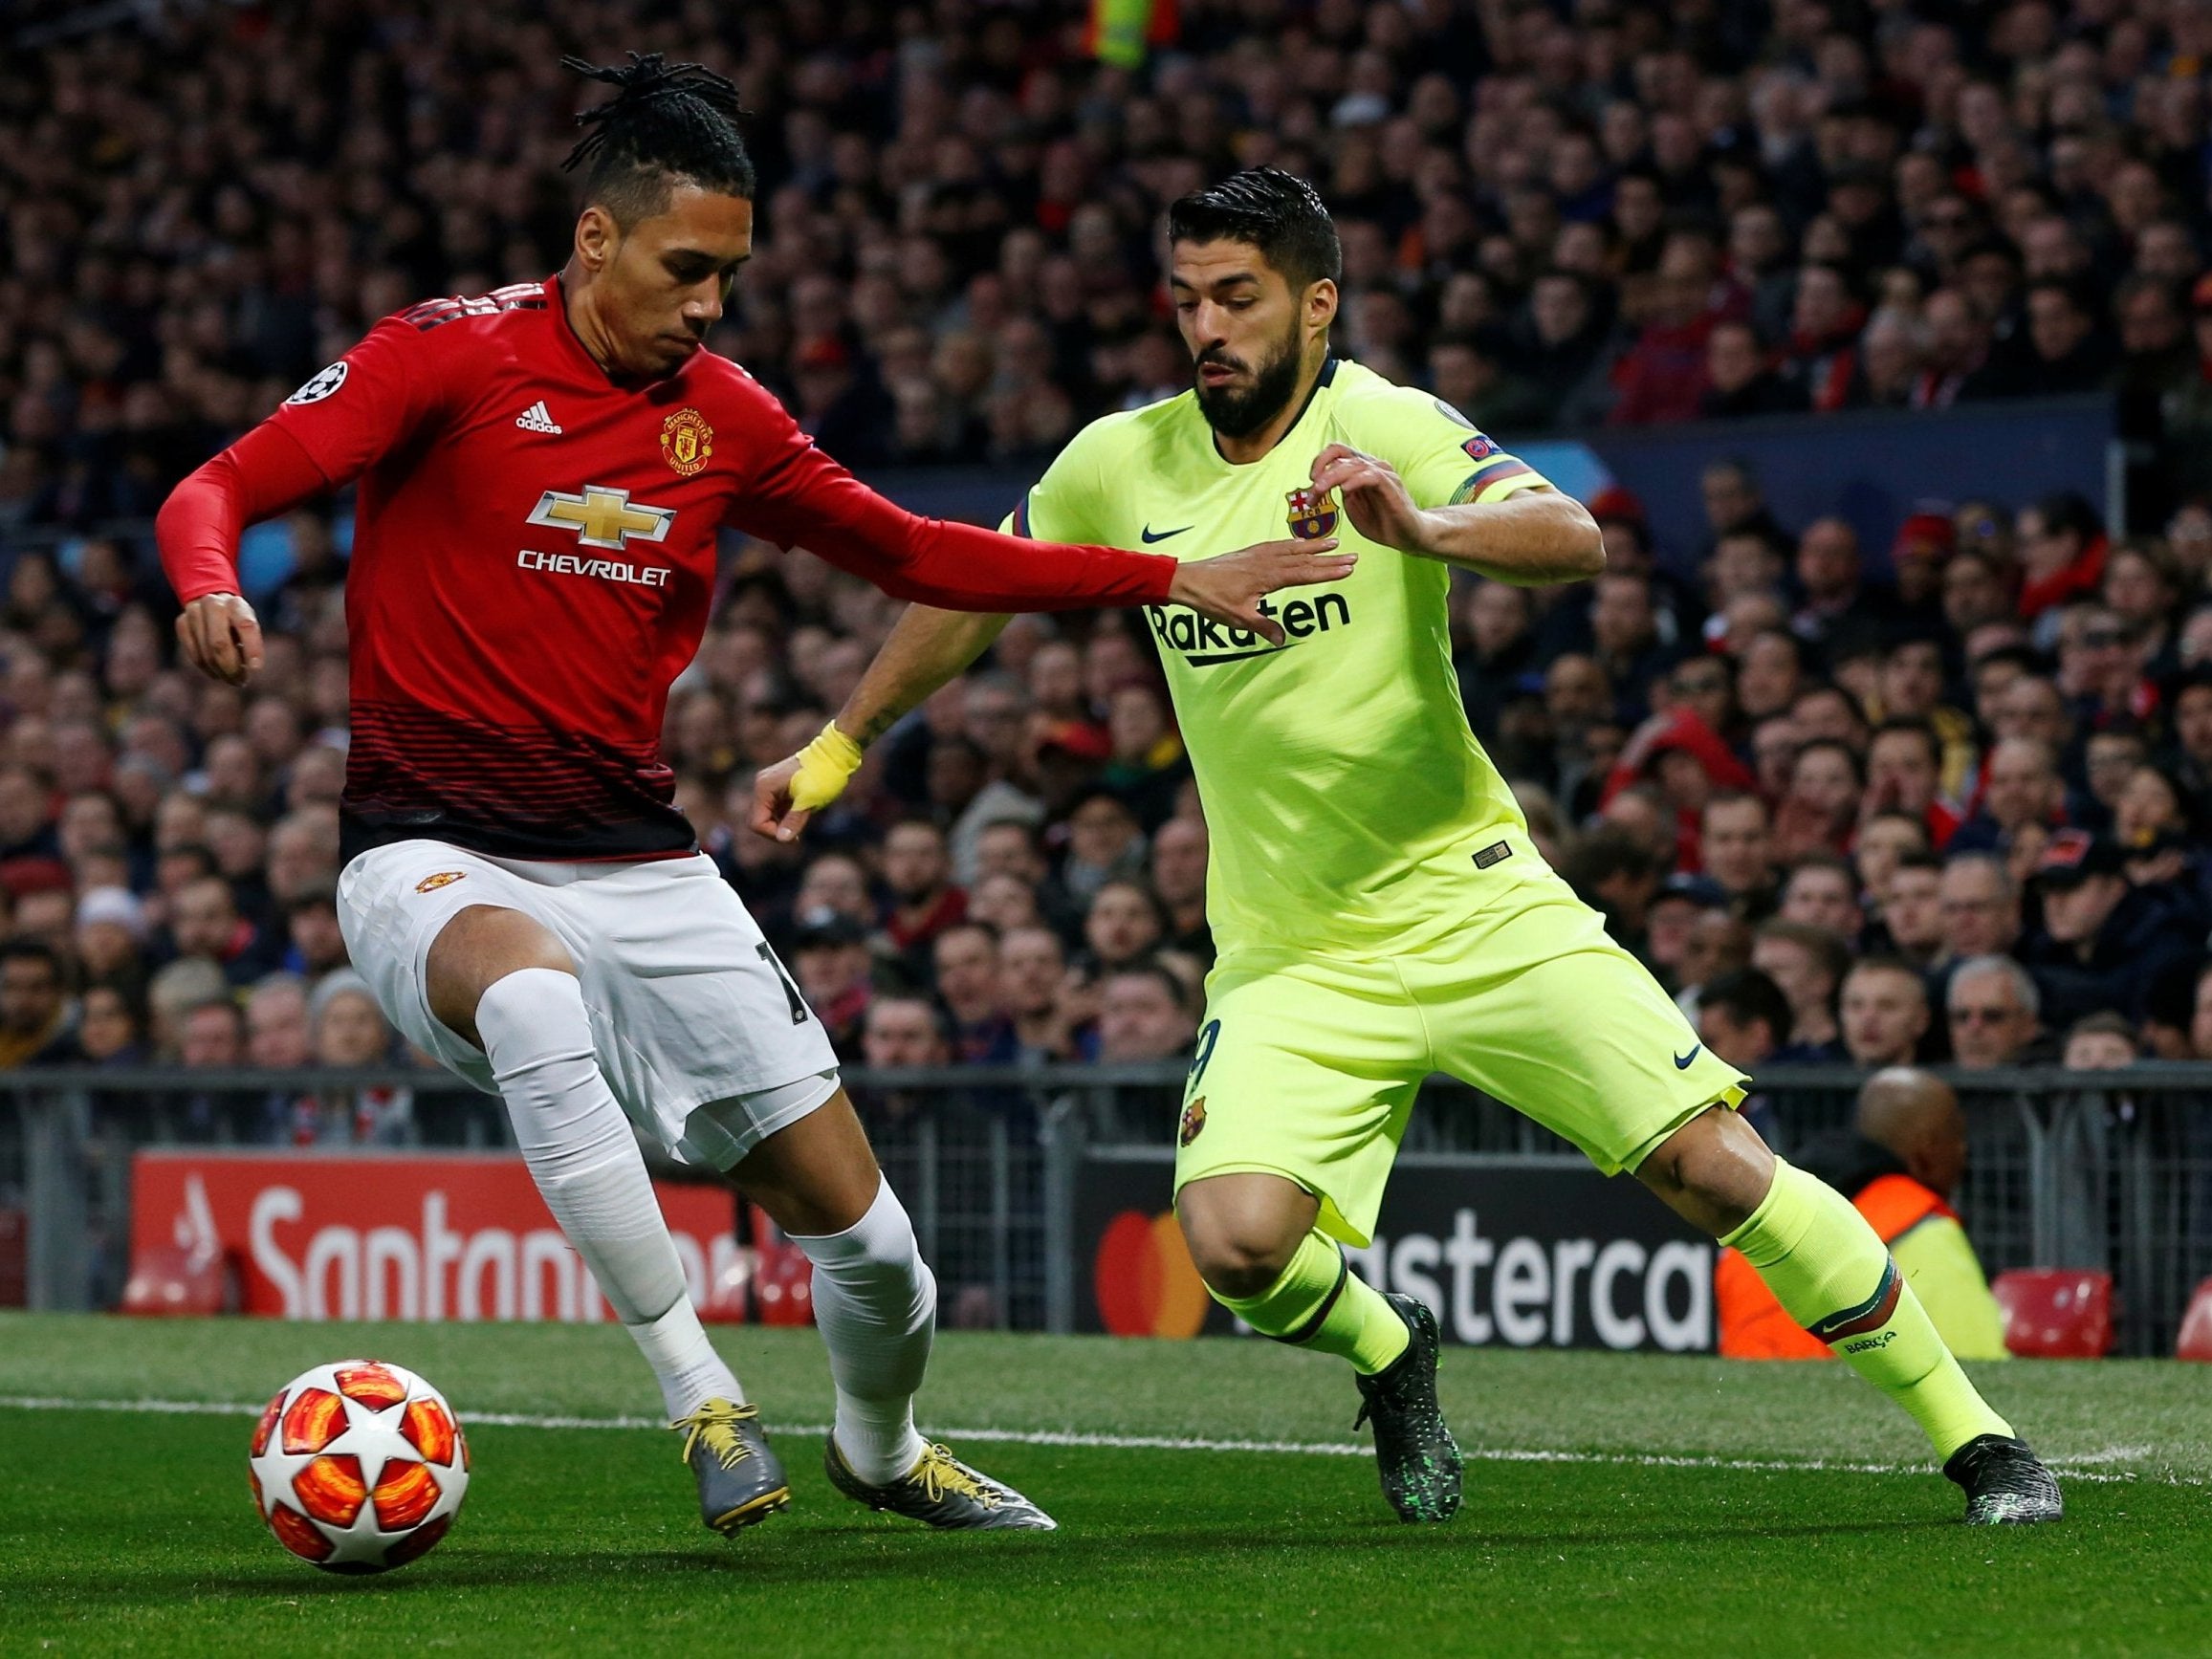 Manchester United vs Barcelona: Five things we learned from Champions League defeat to Luke Shaw own goal